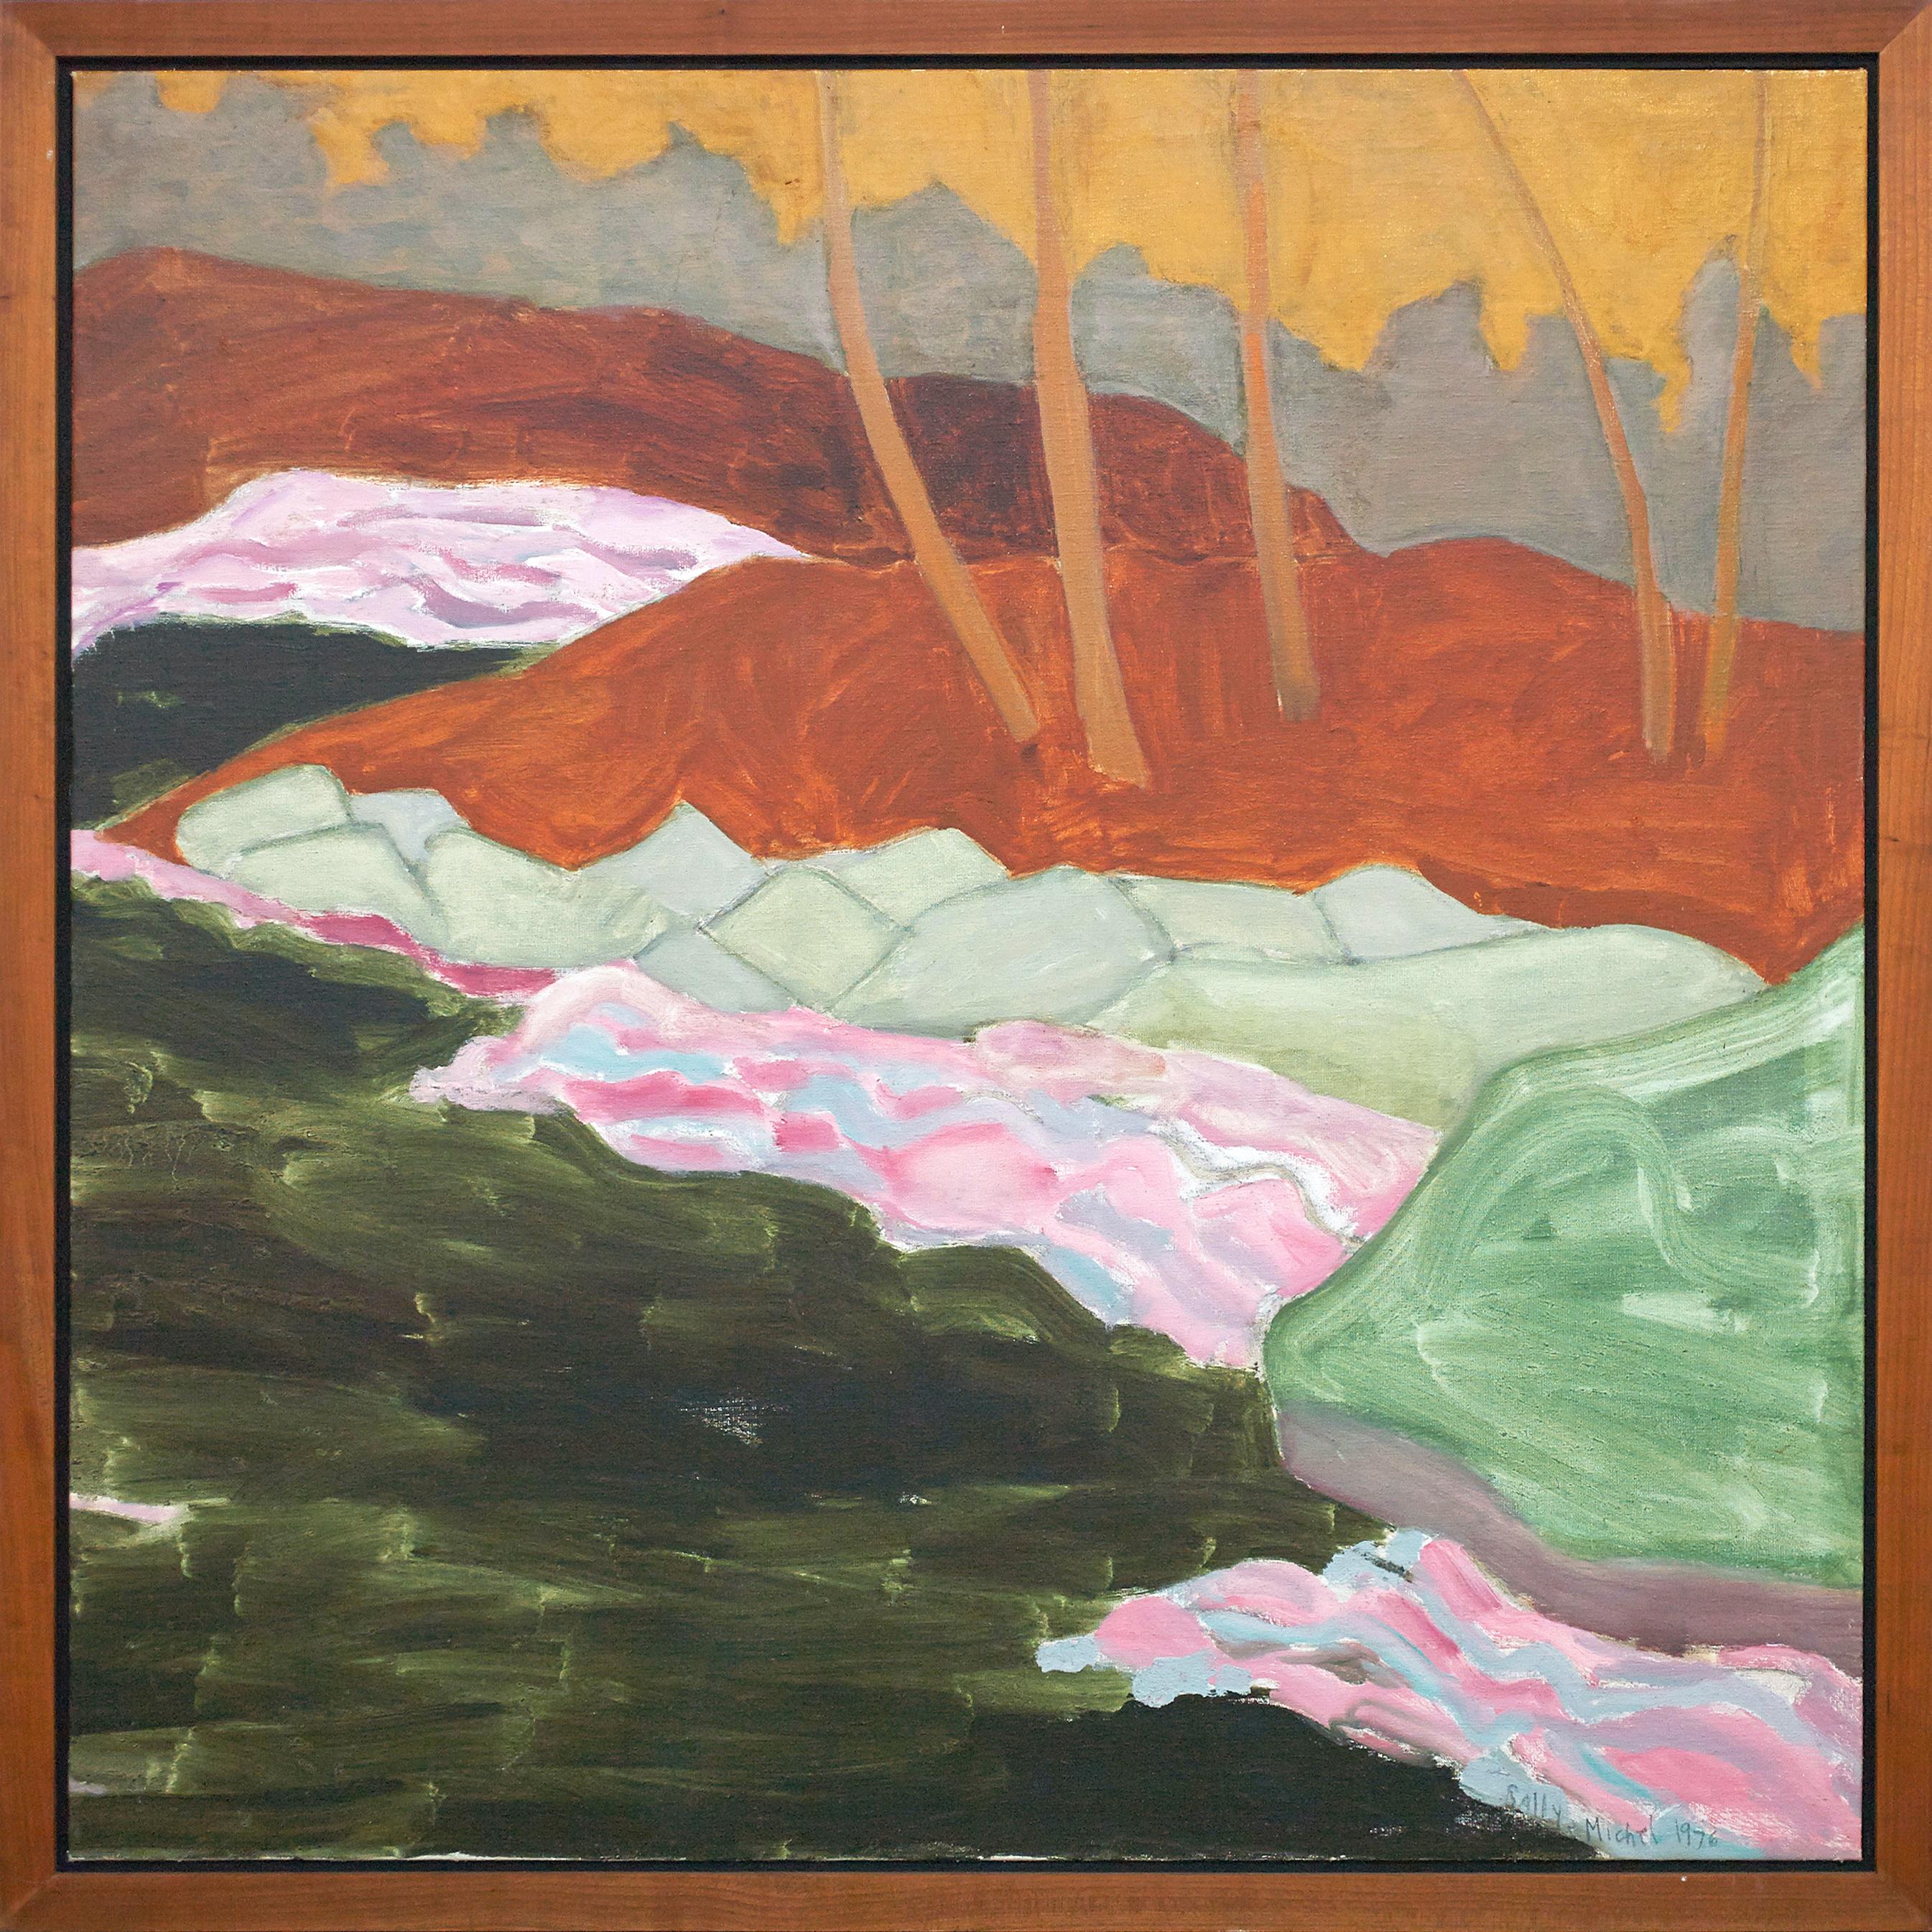 "Stream Side" by Sally Michel Avery, Oil on canvas, 1976